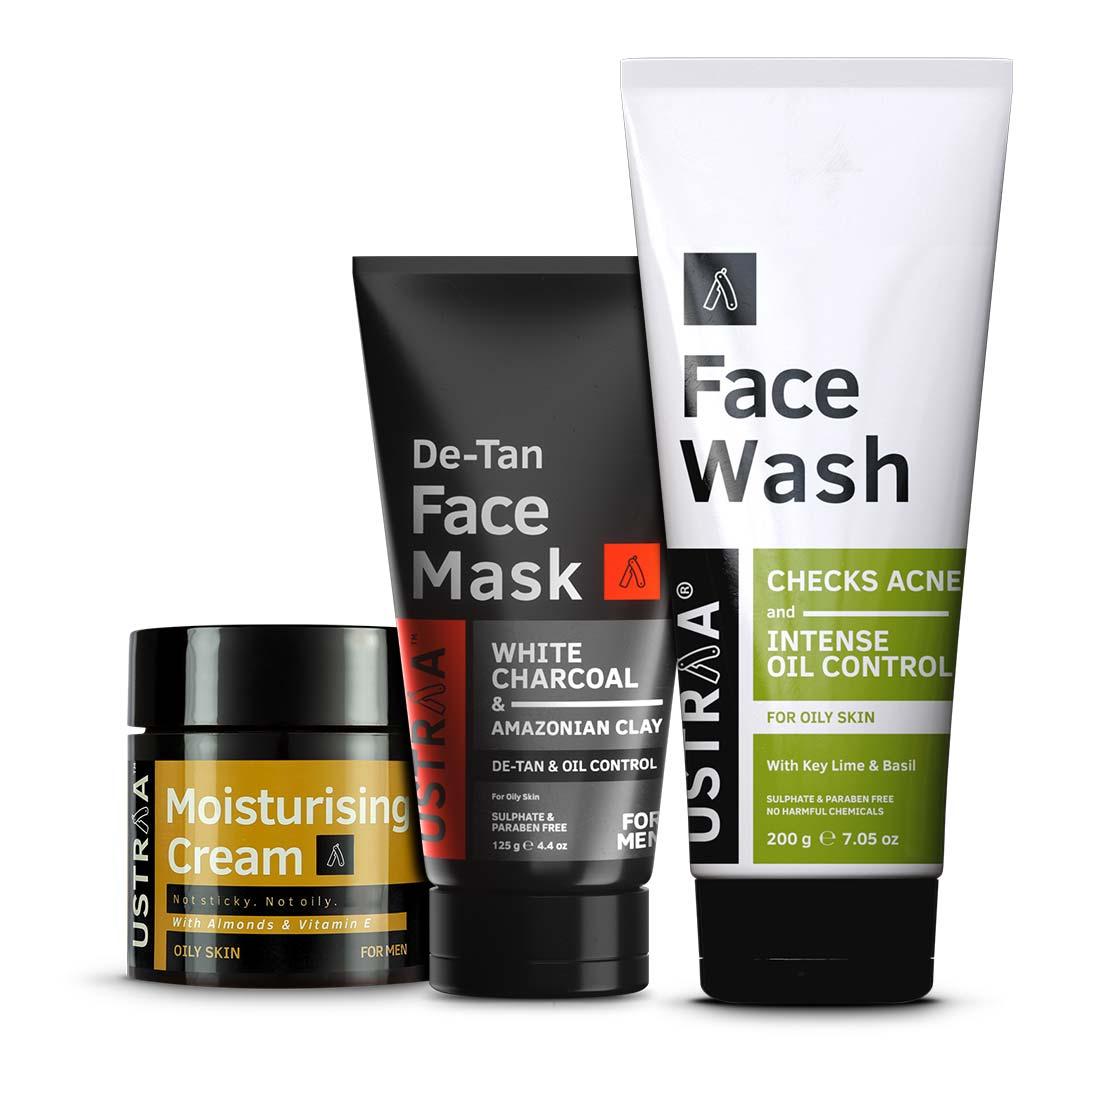 Ustraa Complete Oily Skin Care Kit For Men (Set of 3): Oil Control Face Wash, Moisturizing Cream, and De-Tan Face Mask
